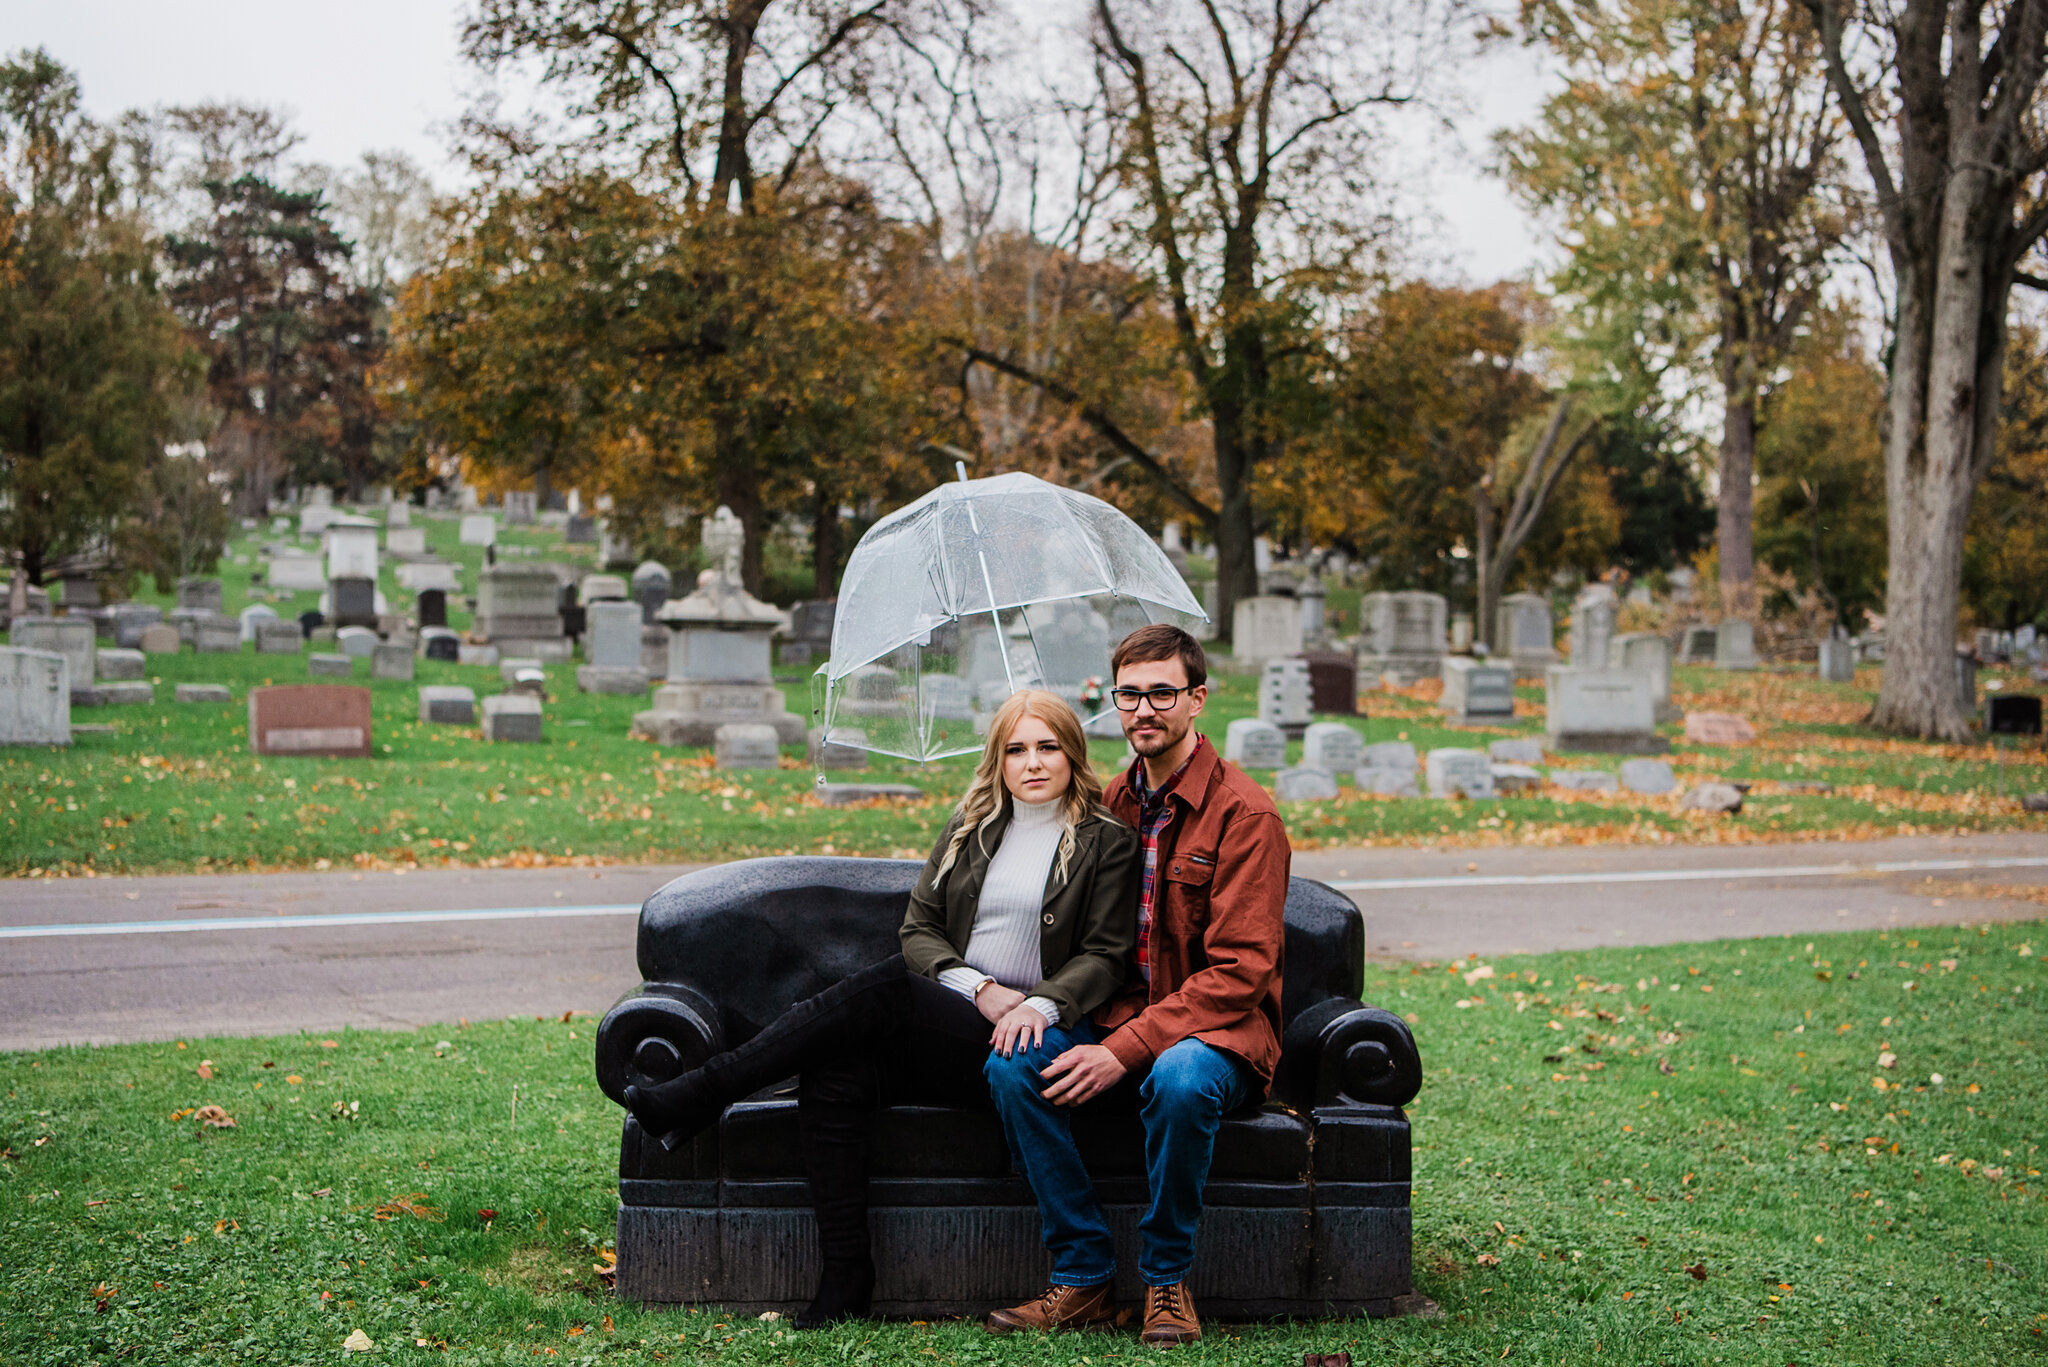 Forest_Lawn_Cemetery_Albright_Knox_Art_Gallery_Buffalo_Engagement_Session_JILL_STUDIO_Rochester_NY_Photographer_1211.jpg